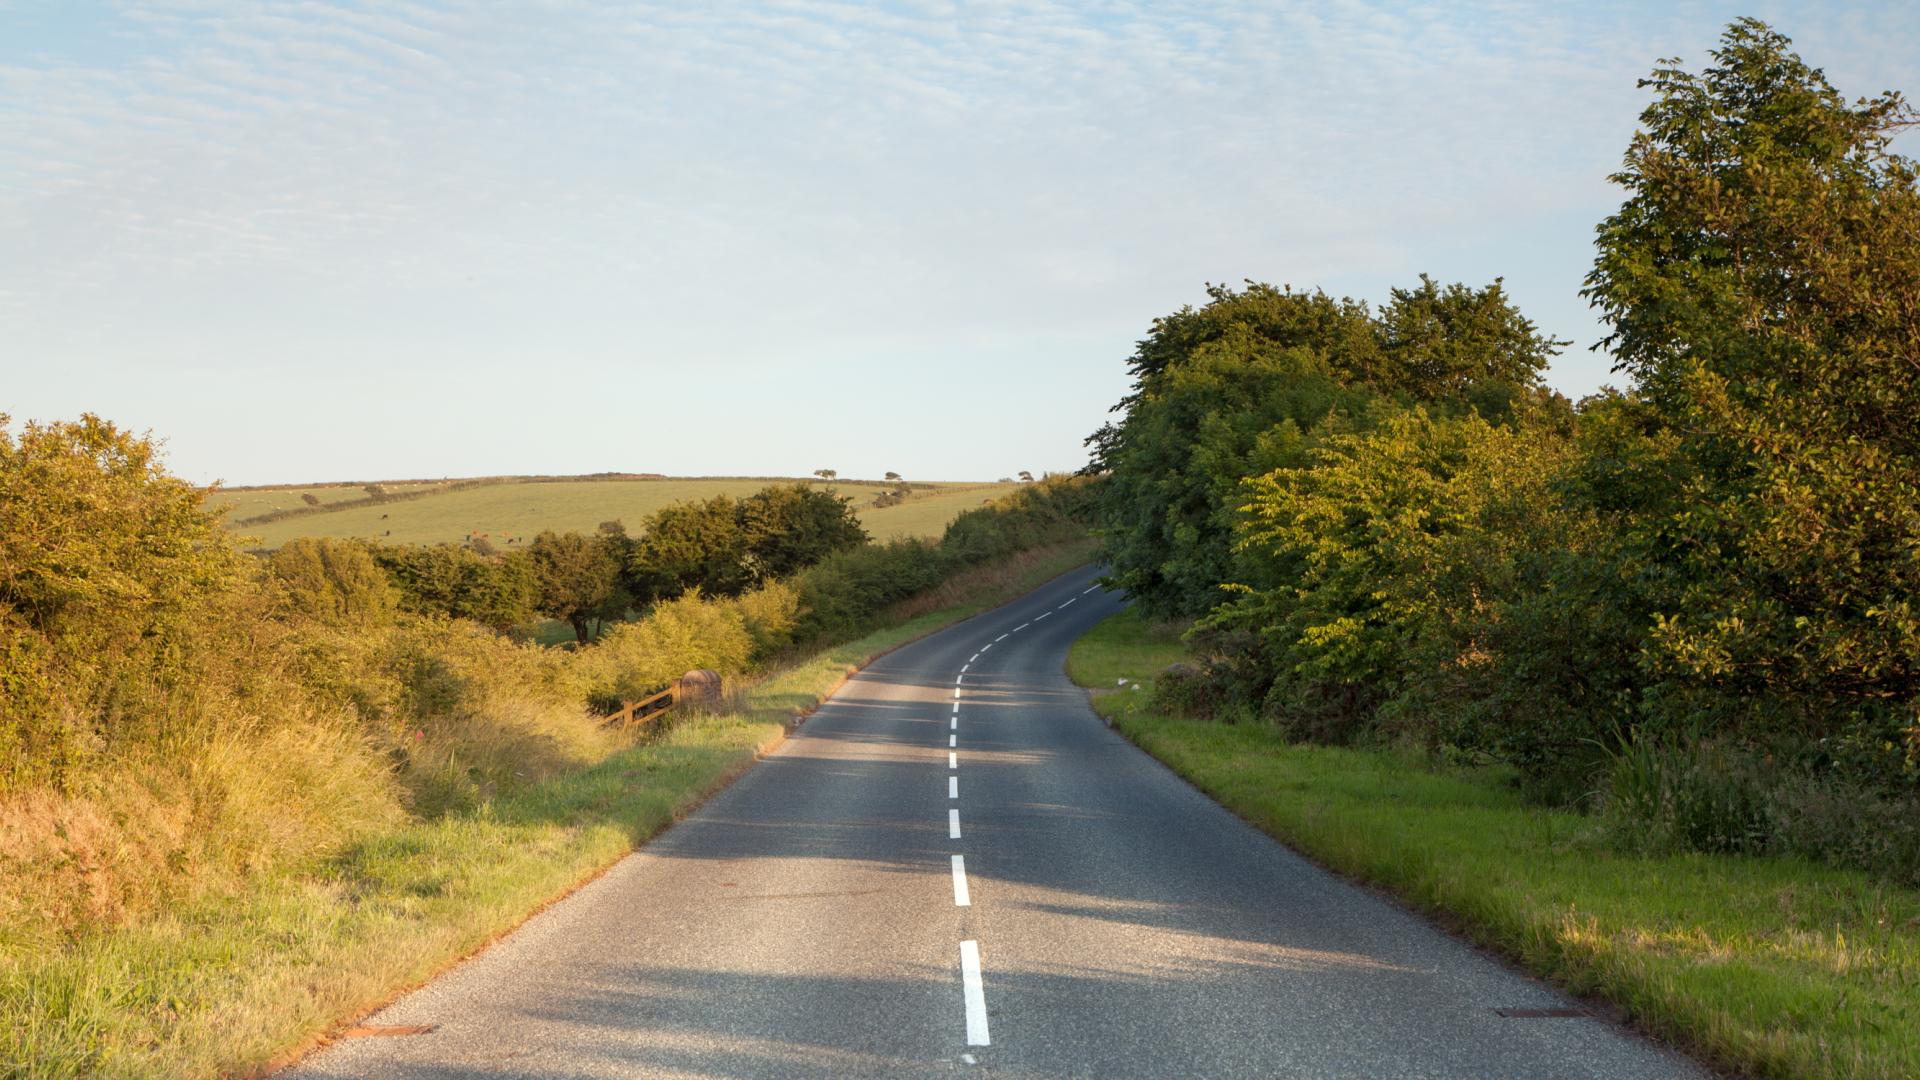 An image of a sunny country road